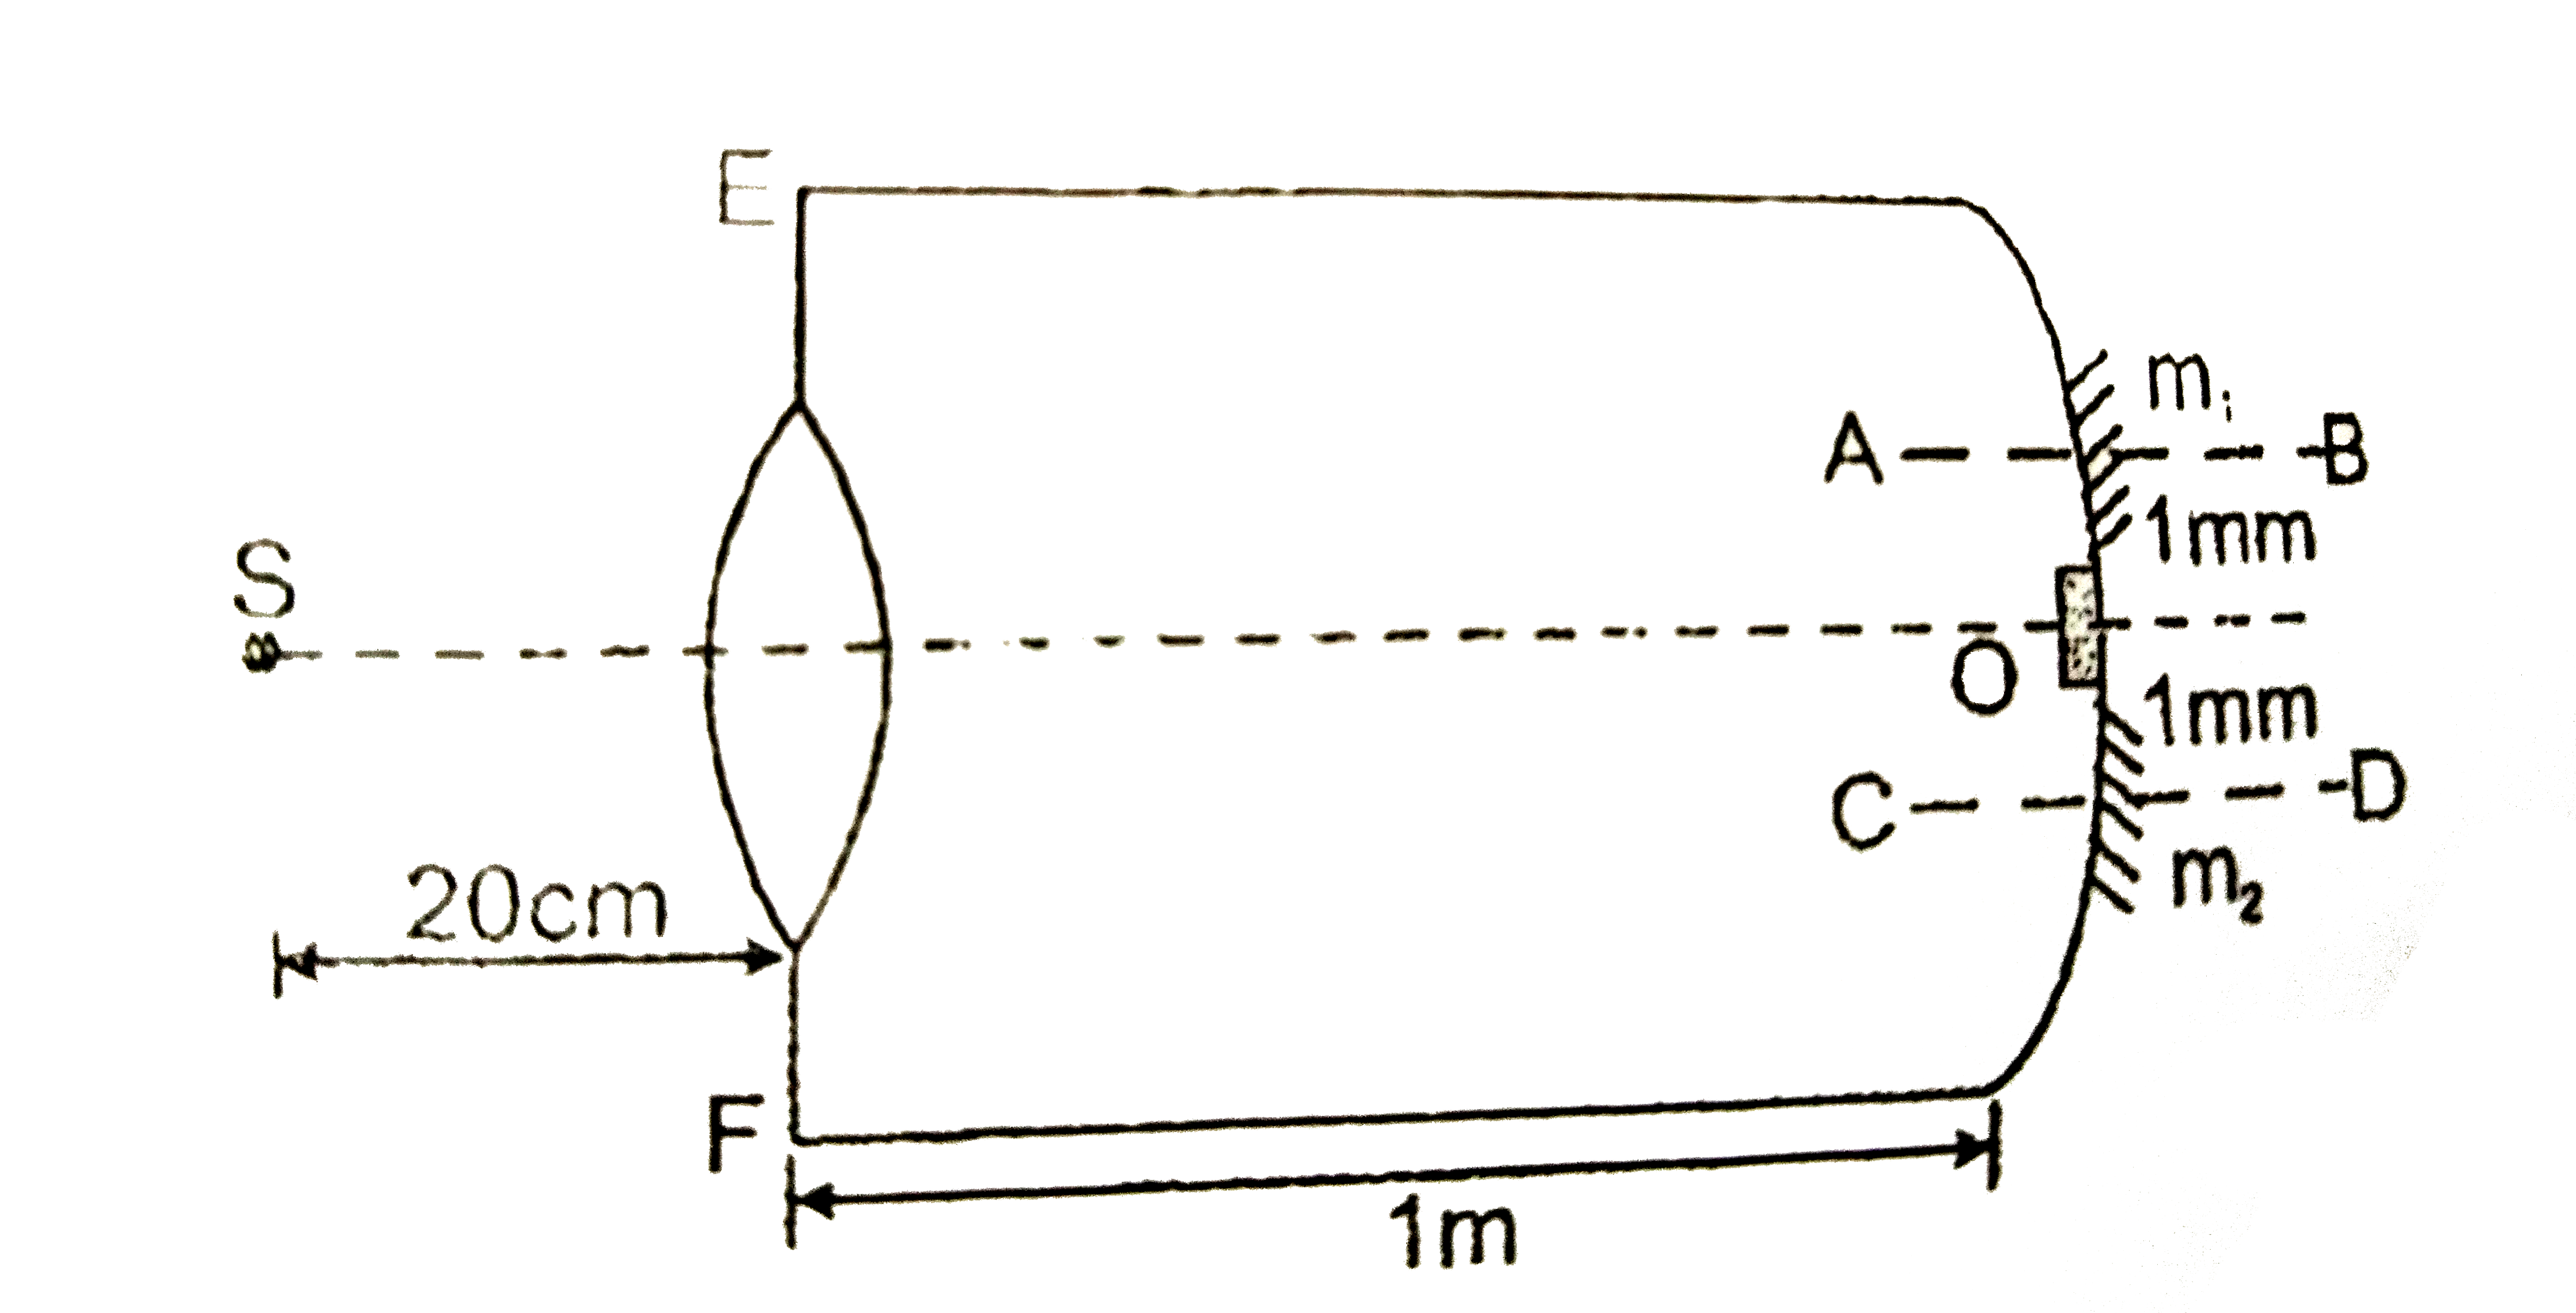 An equil convex lens of focal length 10 cm (in air) and R.l.4//3 is put at a small opening on a tube of length 1 m fully filled with liquid of R.l.4//3.A concave mirror of radius of curvature 20 cm is cut into two halves m(1) and m(2) and placed at the end of the tube. m(1) & m(2) are placed such that thir principal axis AD, and CD respectively are separated by 1 mm each from the principal axis of the lens. A slit S placed in air illuminates the lens with light of frequency 7.5xx10^(14) Hz. The light reflected from m(1) and m(2) forms interference pattern on the left end EF of the tube. O is an opaque substance to cover the hole left by m(1) & m(2). Find :       (a) the position of the iamge formed by lens water combination.   (b) the distance between the images formed by m(1) & m(2).    (c) width of the fringes on EF